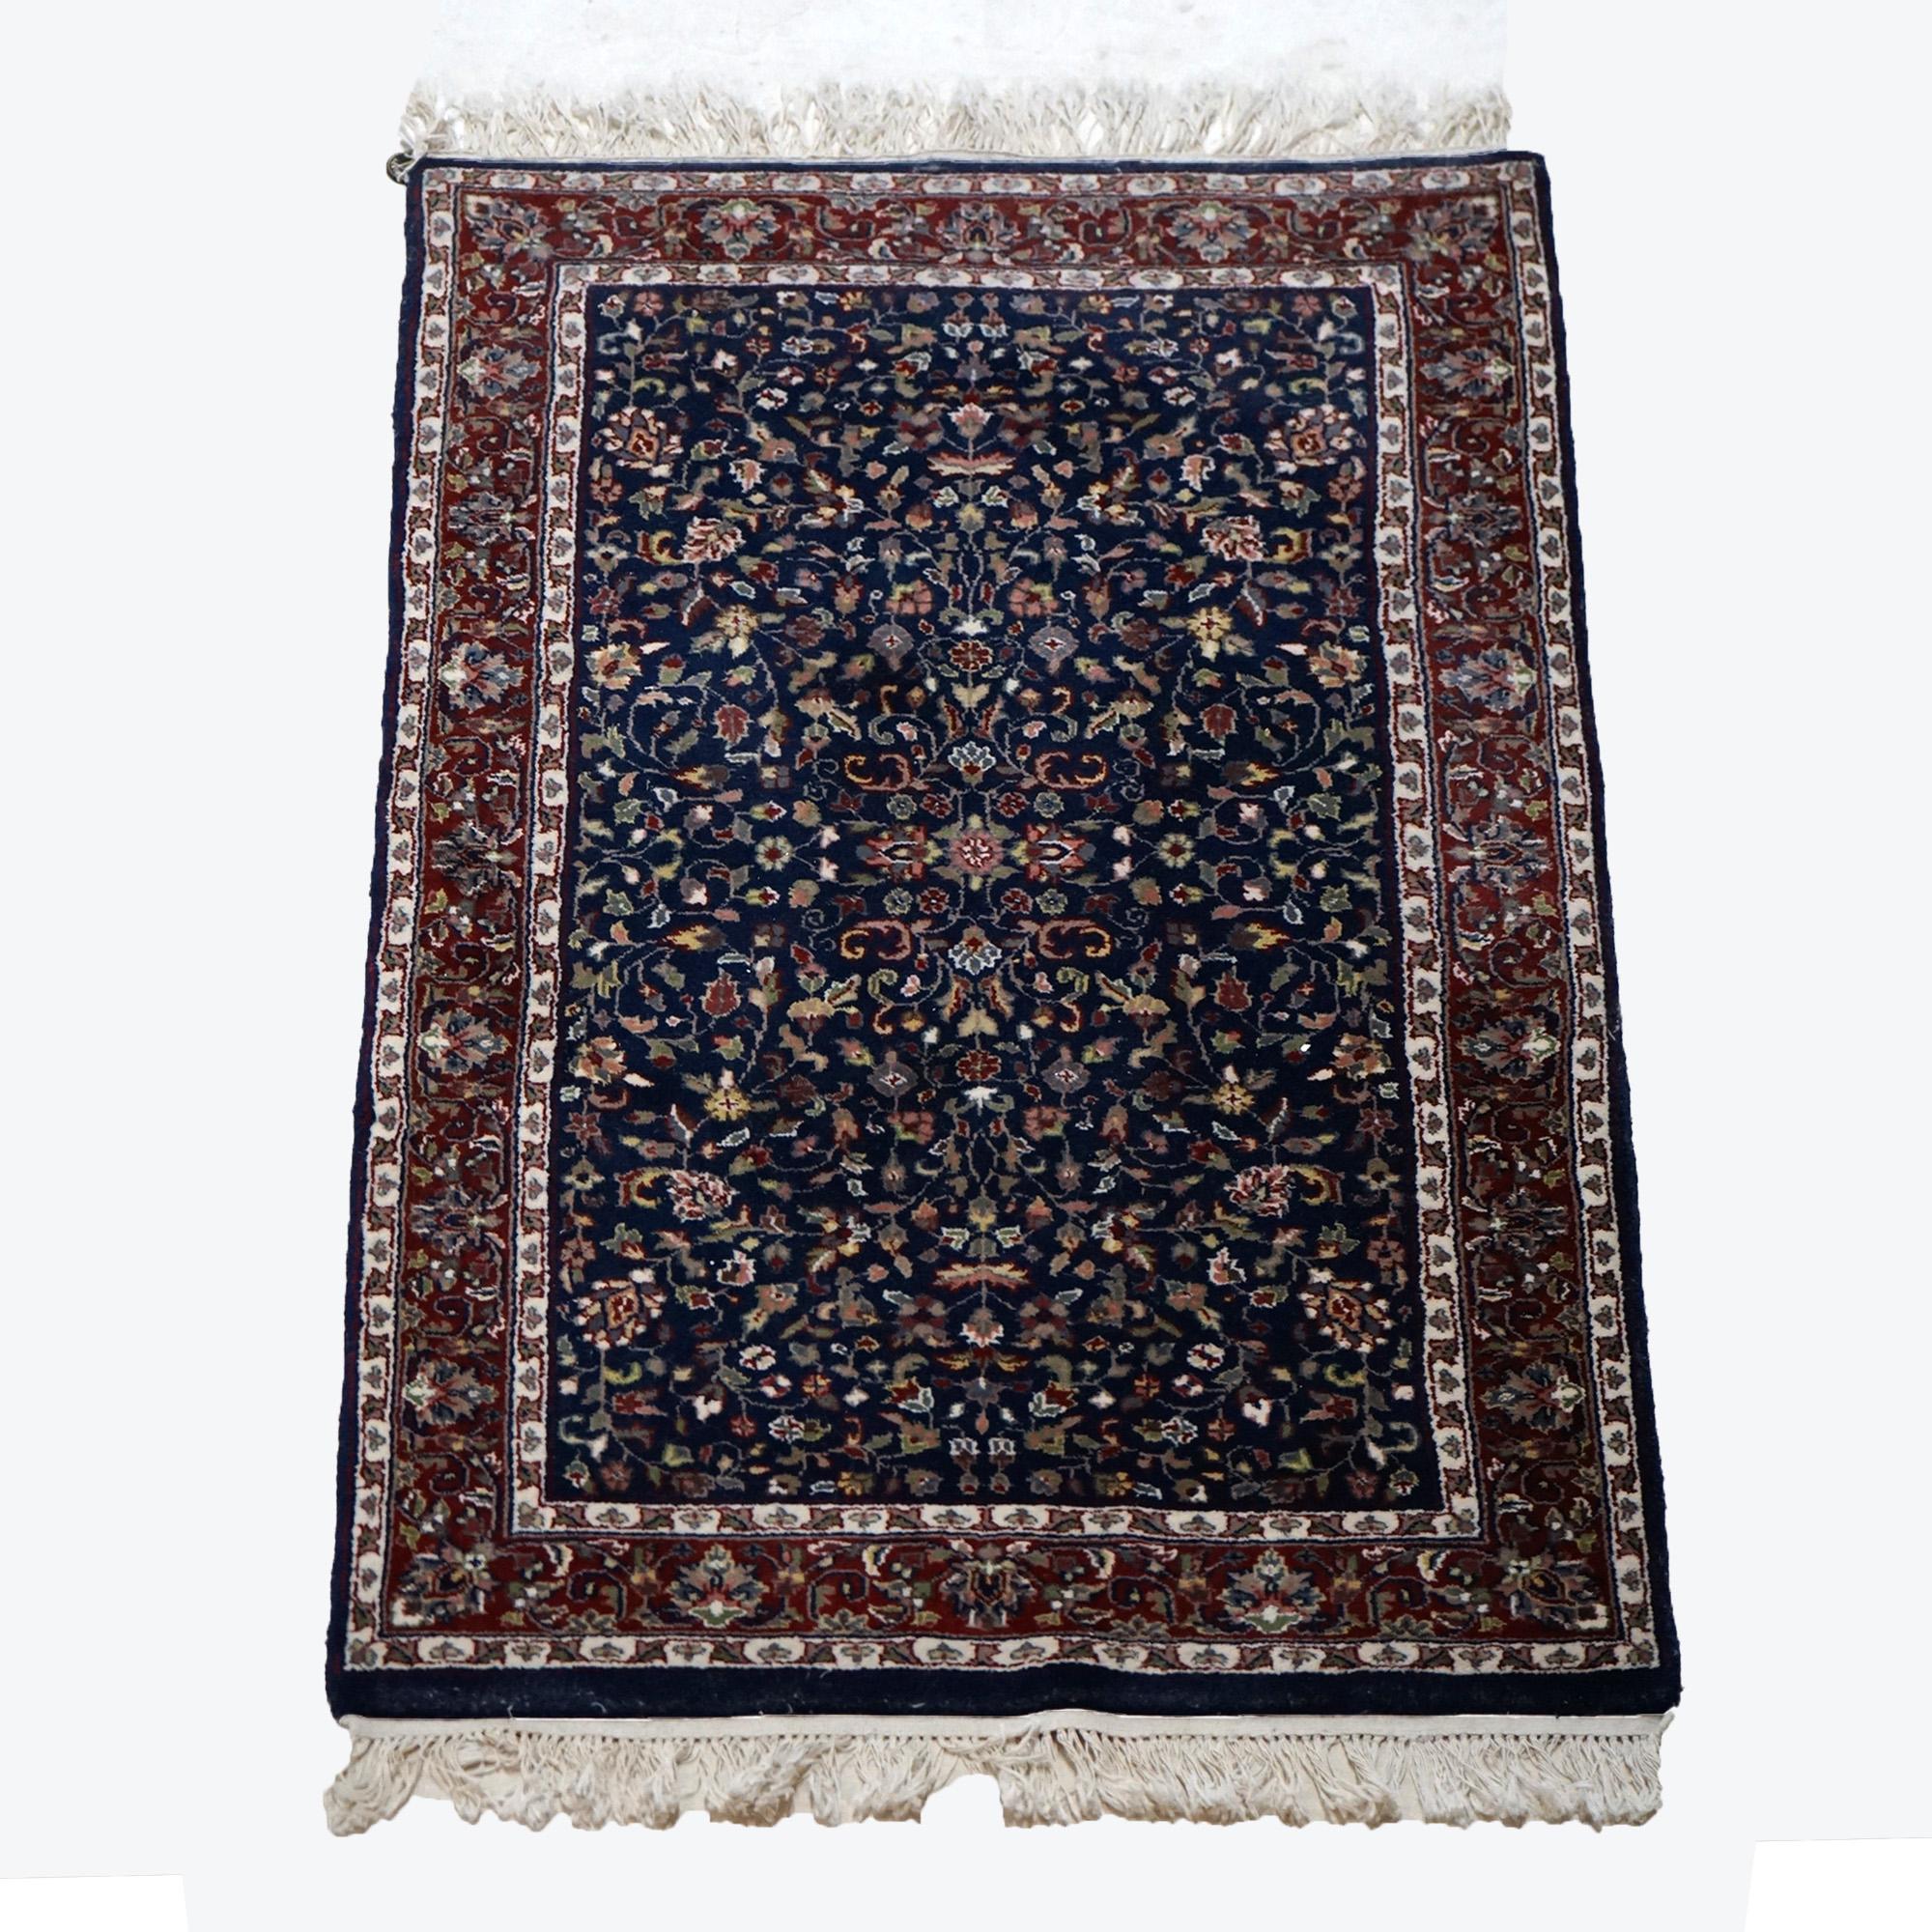 An oriental rug offers wool construction with detached floral spray throughout, 20th century

Measures - 51.25